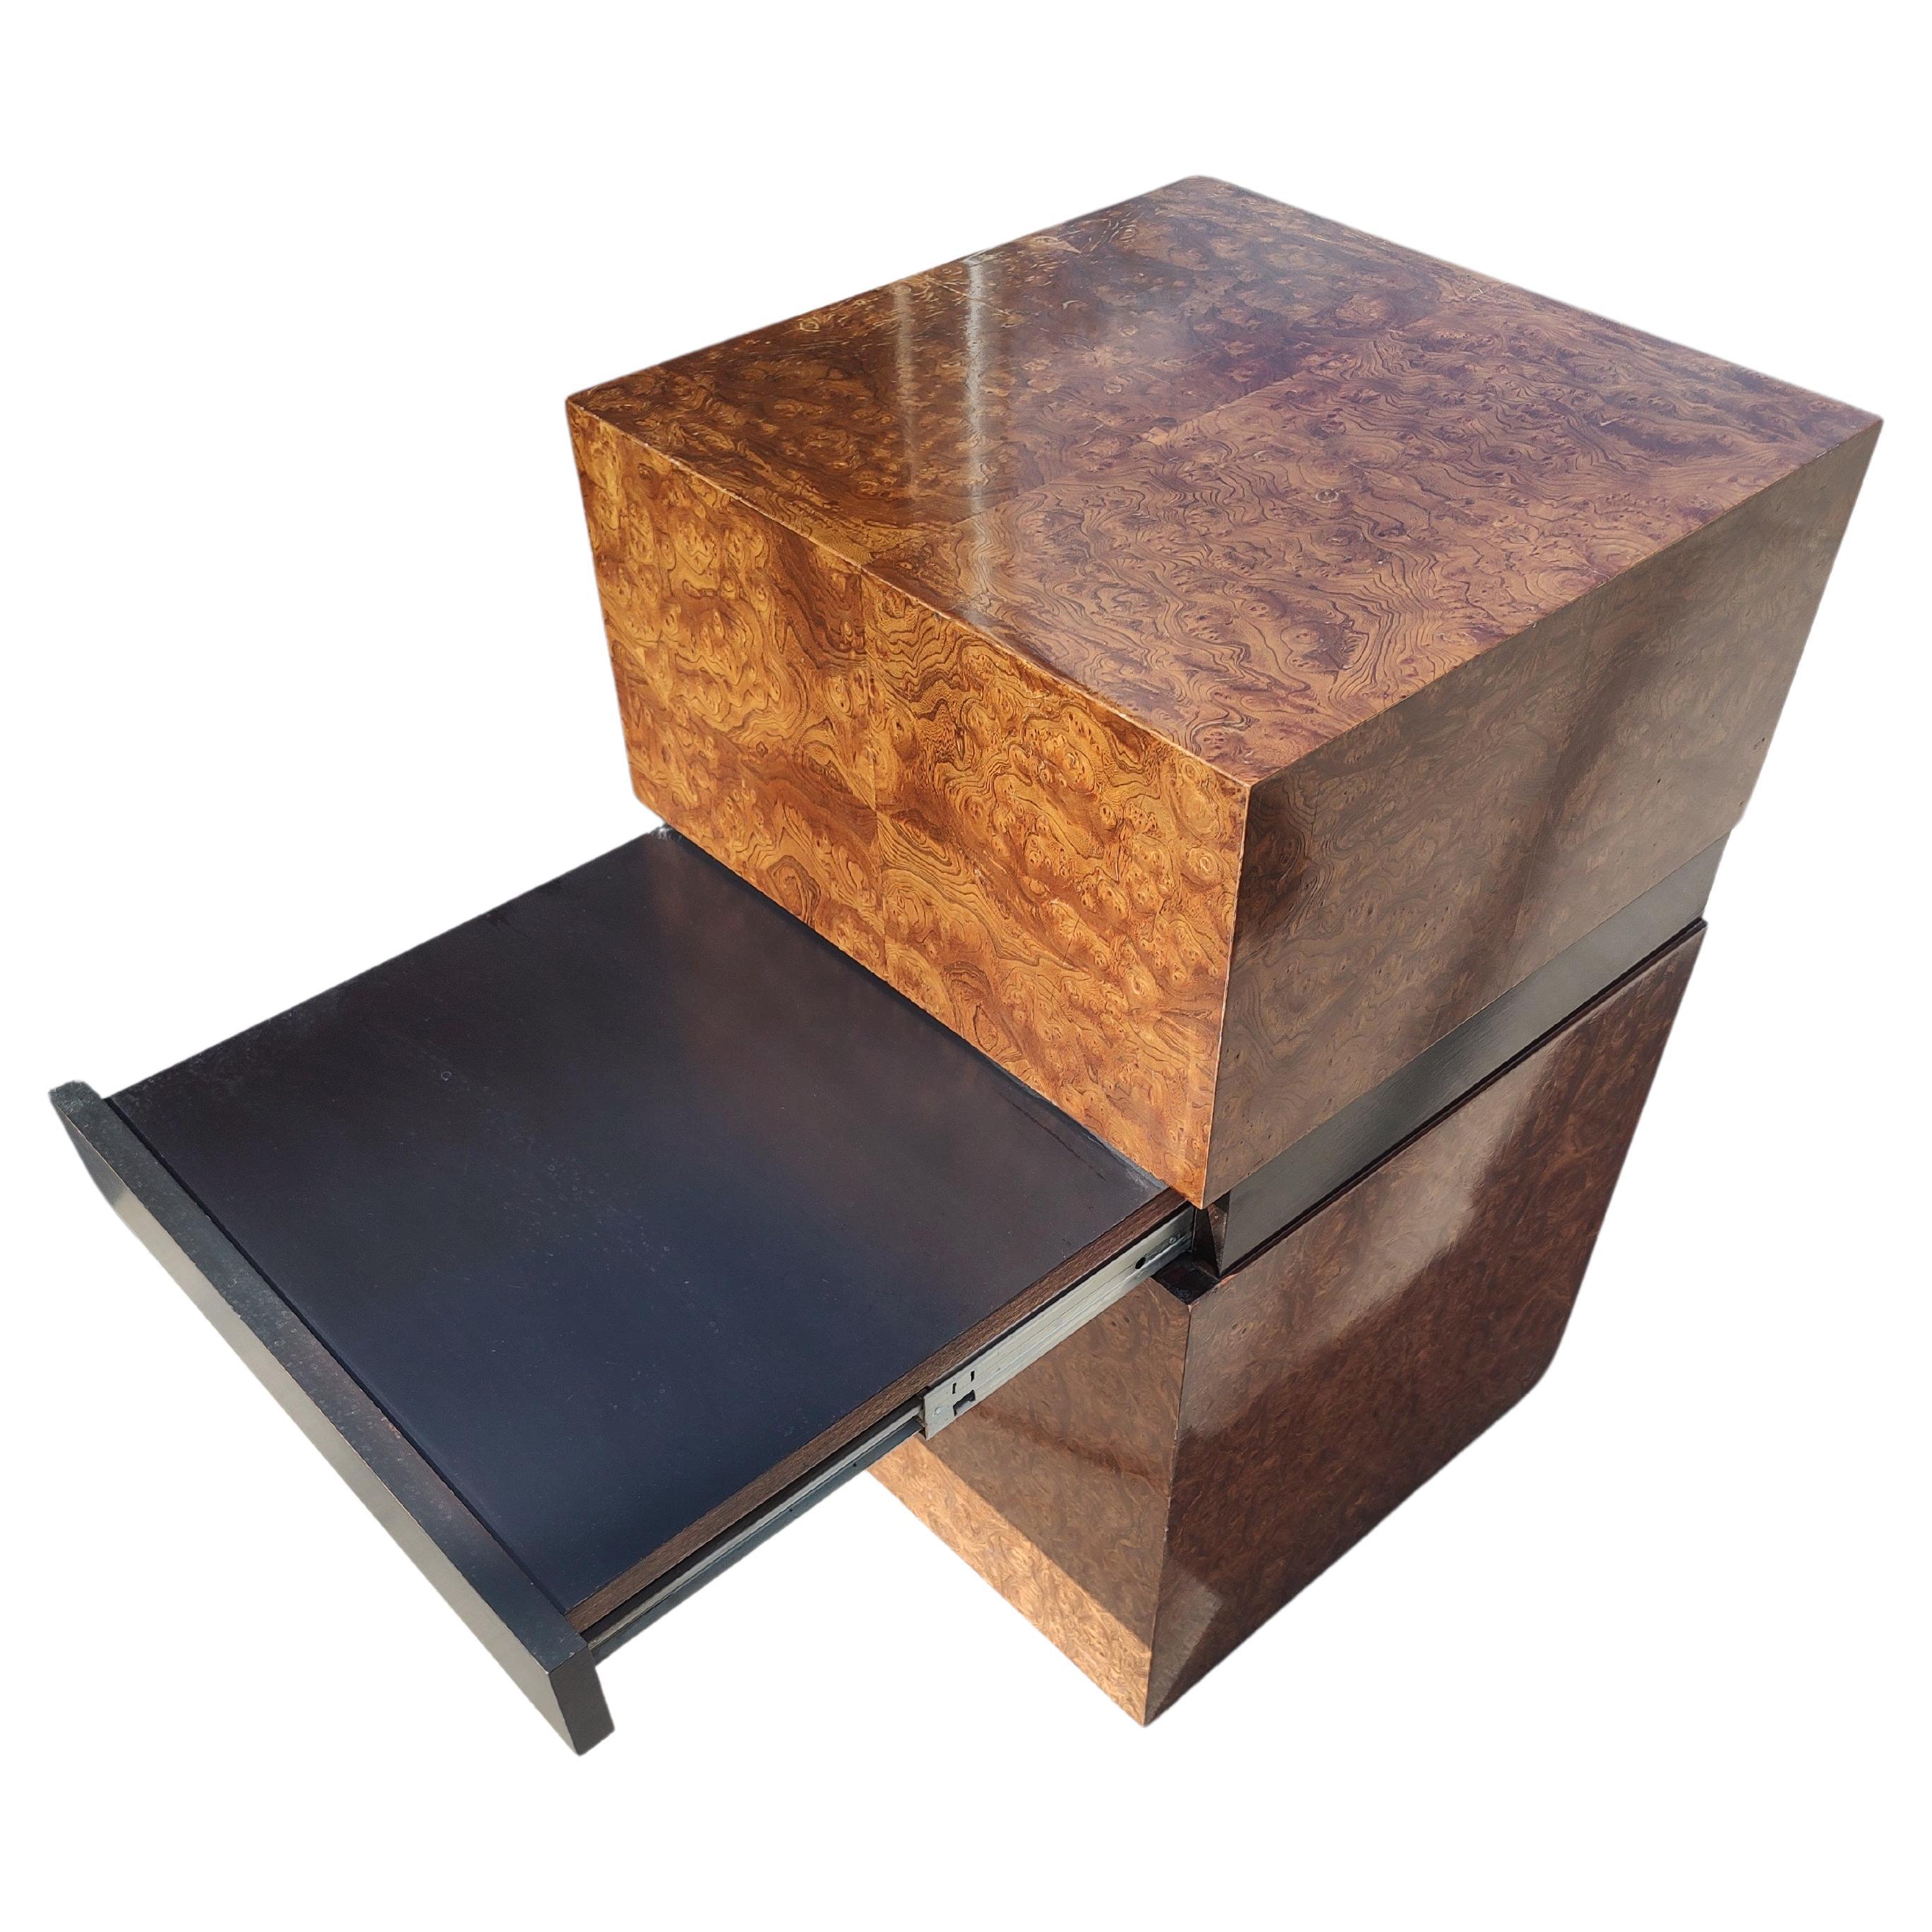 Fabulous tall 20 x 20 x 32.75h cube table in burled olivewood with a hidden pullout writing/work drawer, tray is 18 x 15. Fantastic burled olivewood veneer which is in excellent vintage condition with minimal wear. Drawer when closed is hidden in